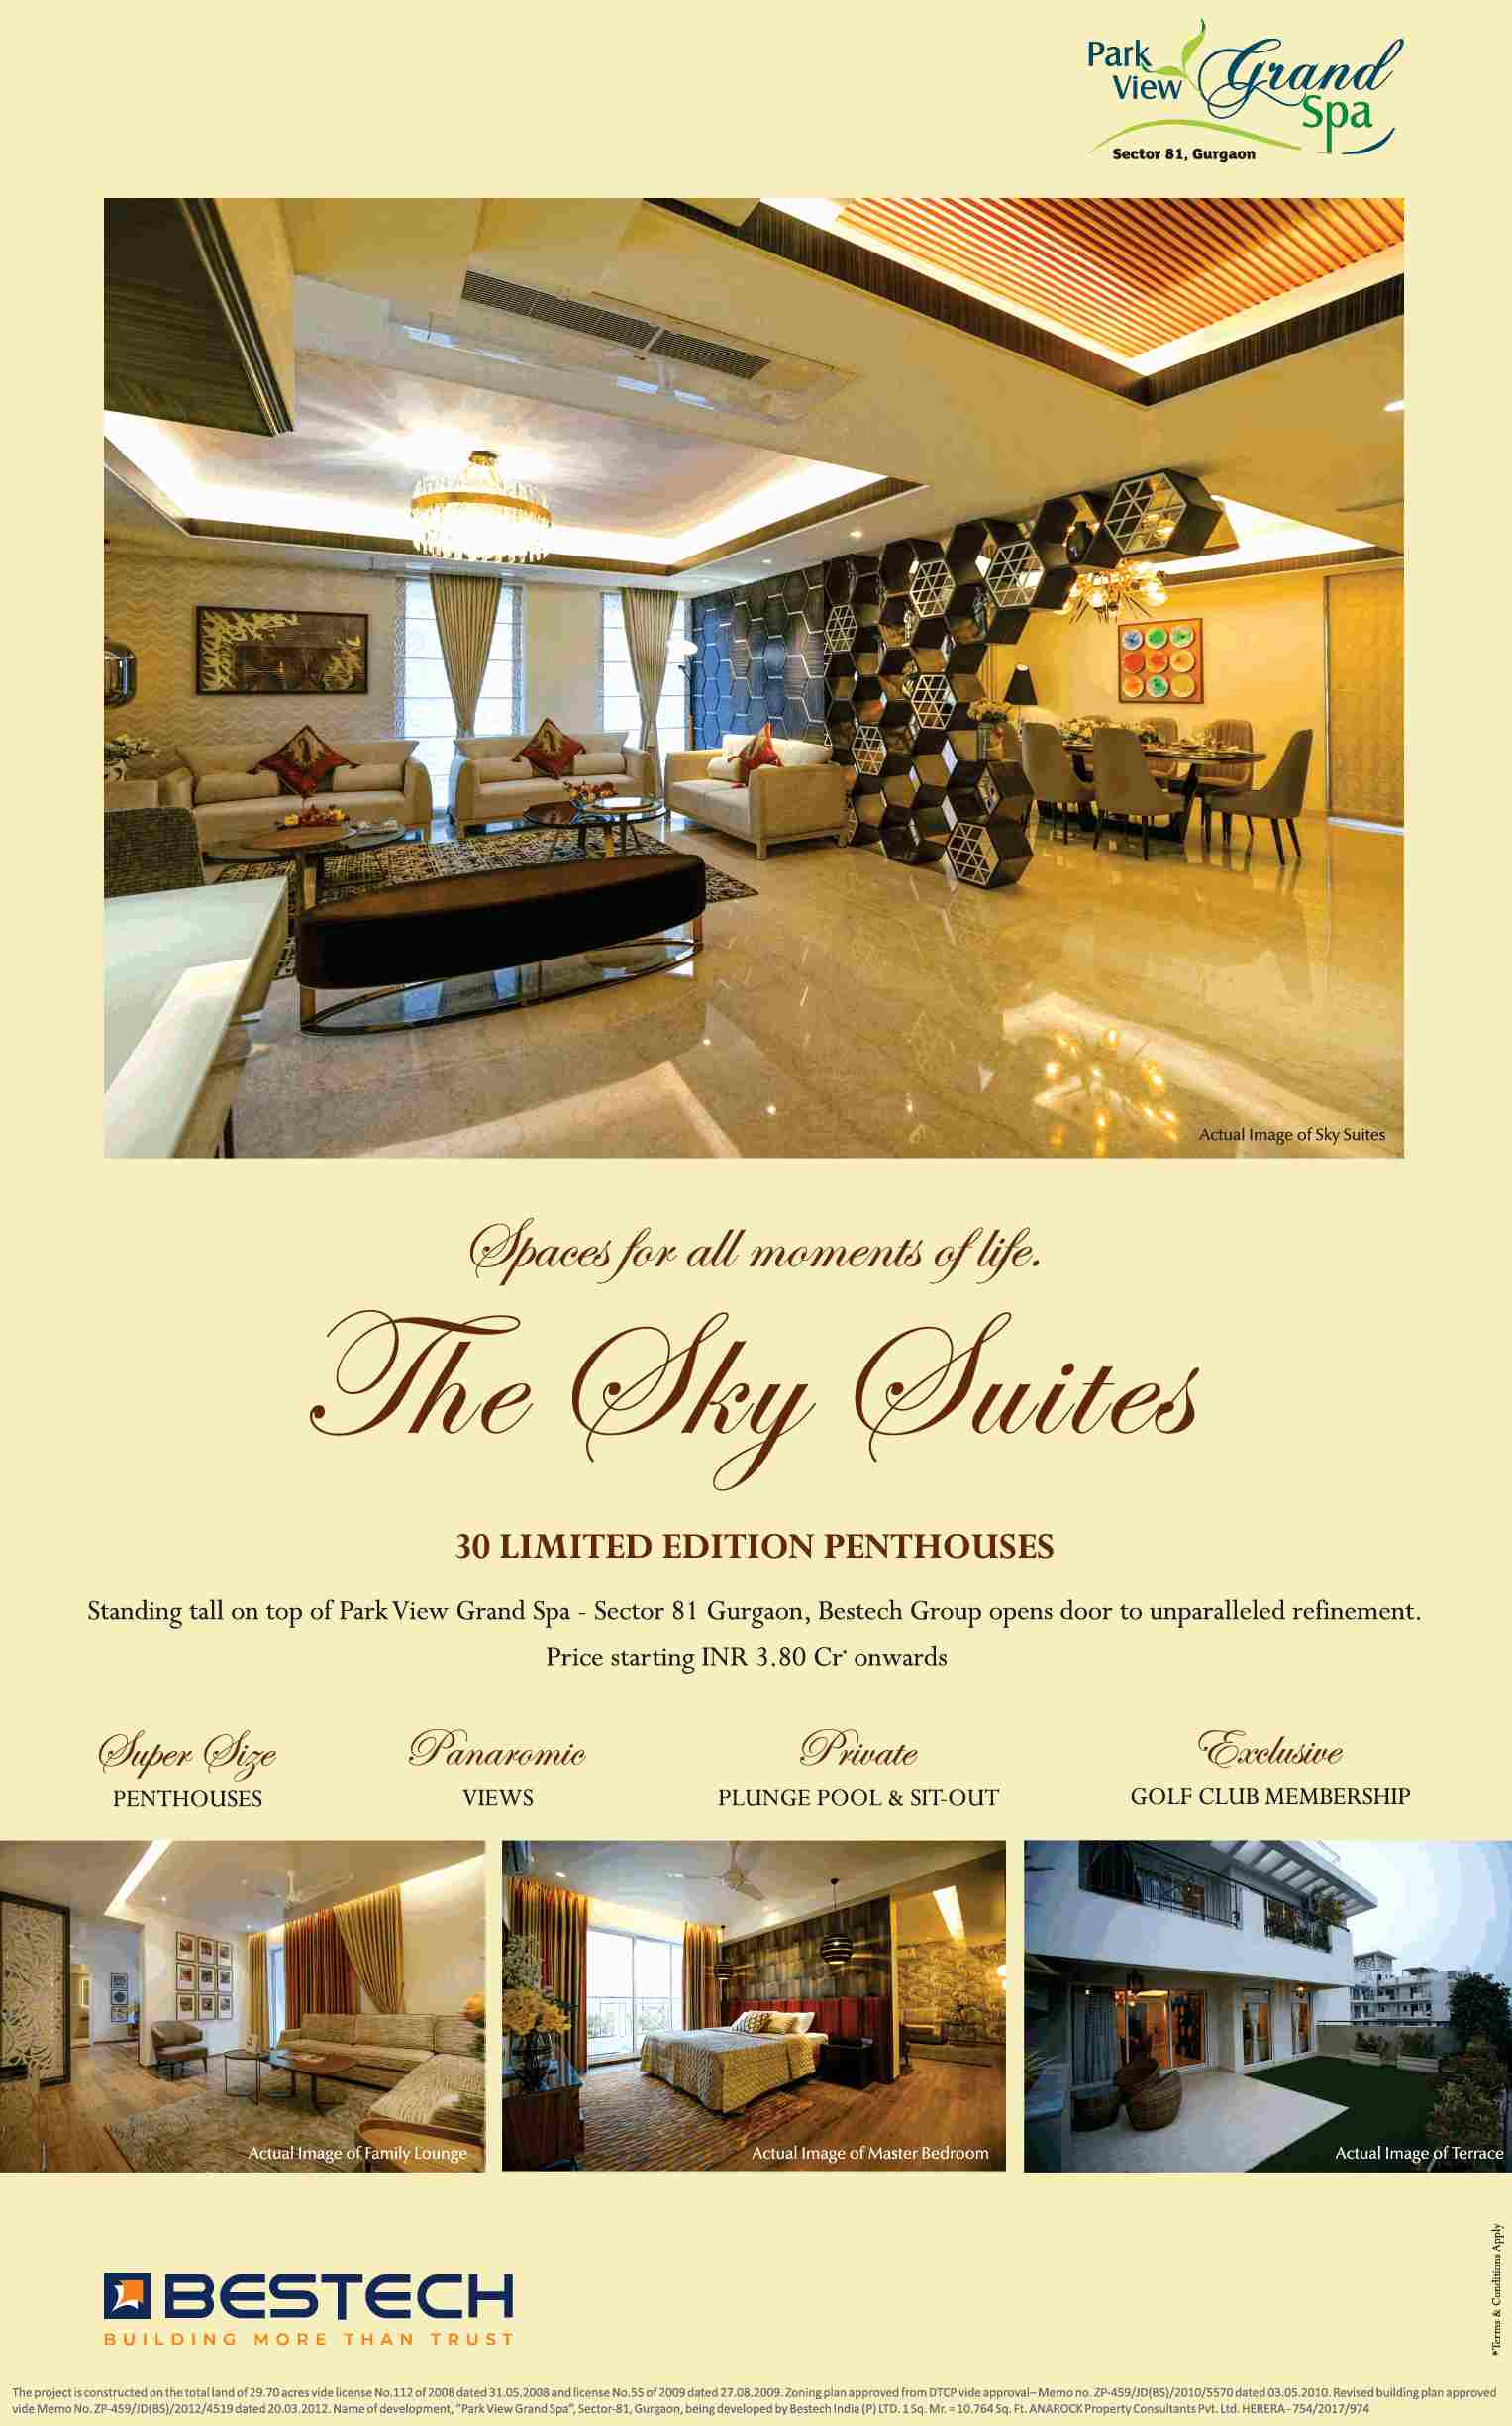 Presenting The Sky Suites at Bestech Park View Grand Spa in Sector 81, Gurgaon Update